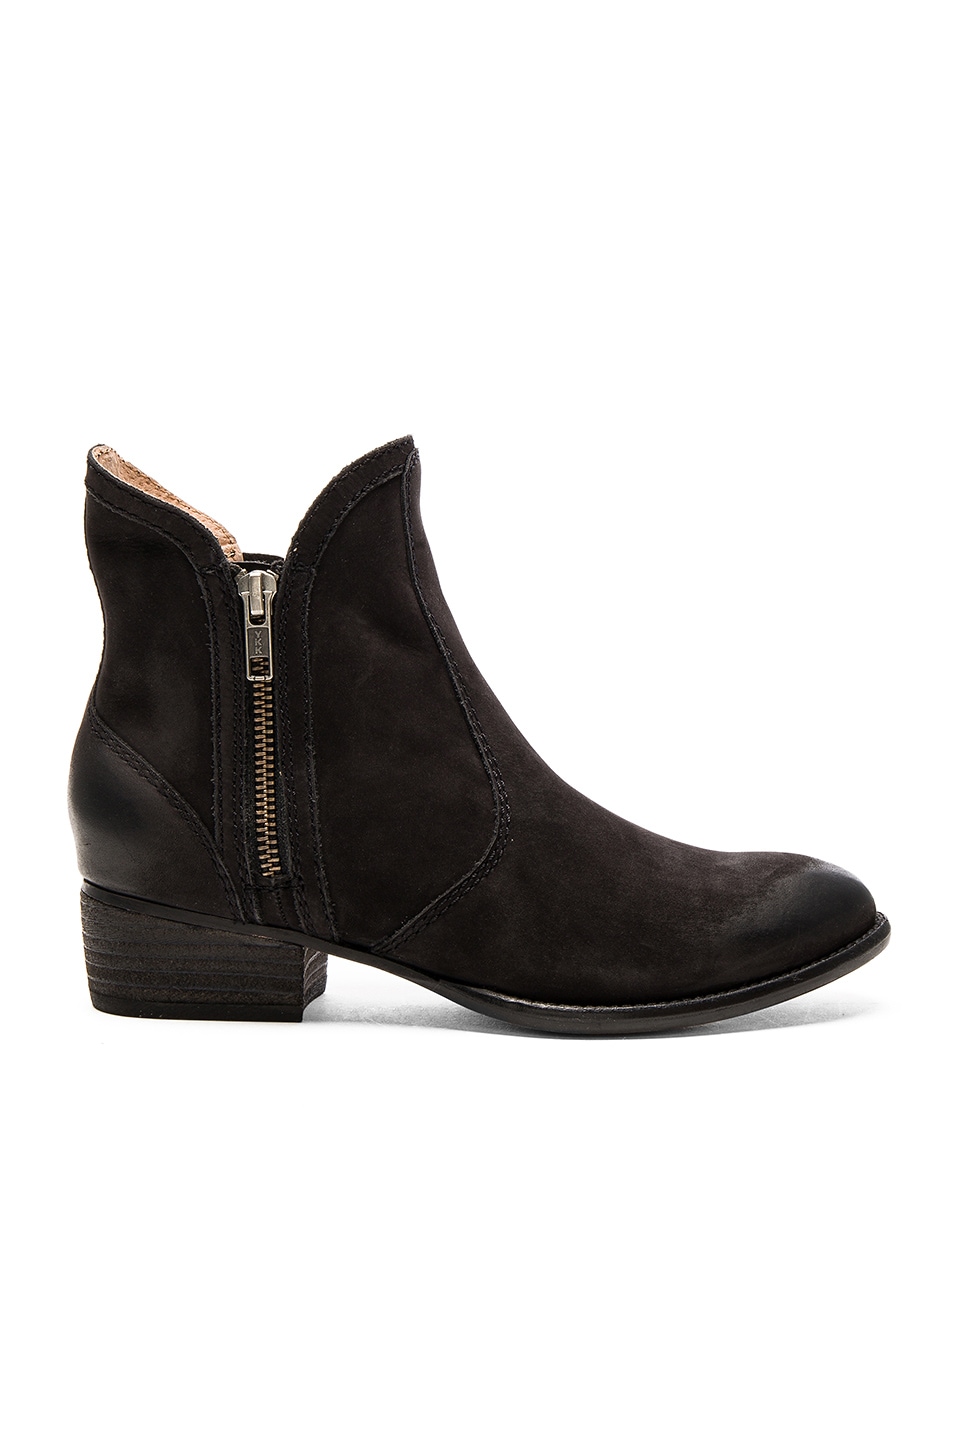 Seychelles Lucky Penny Booties in Black 